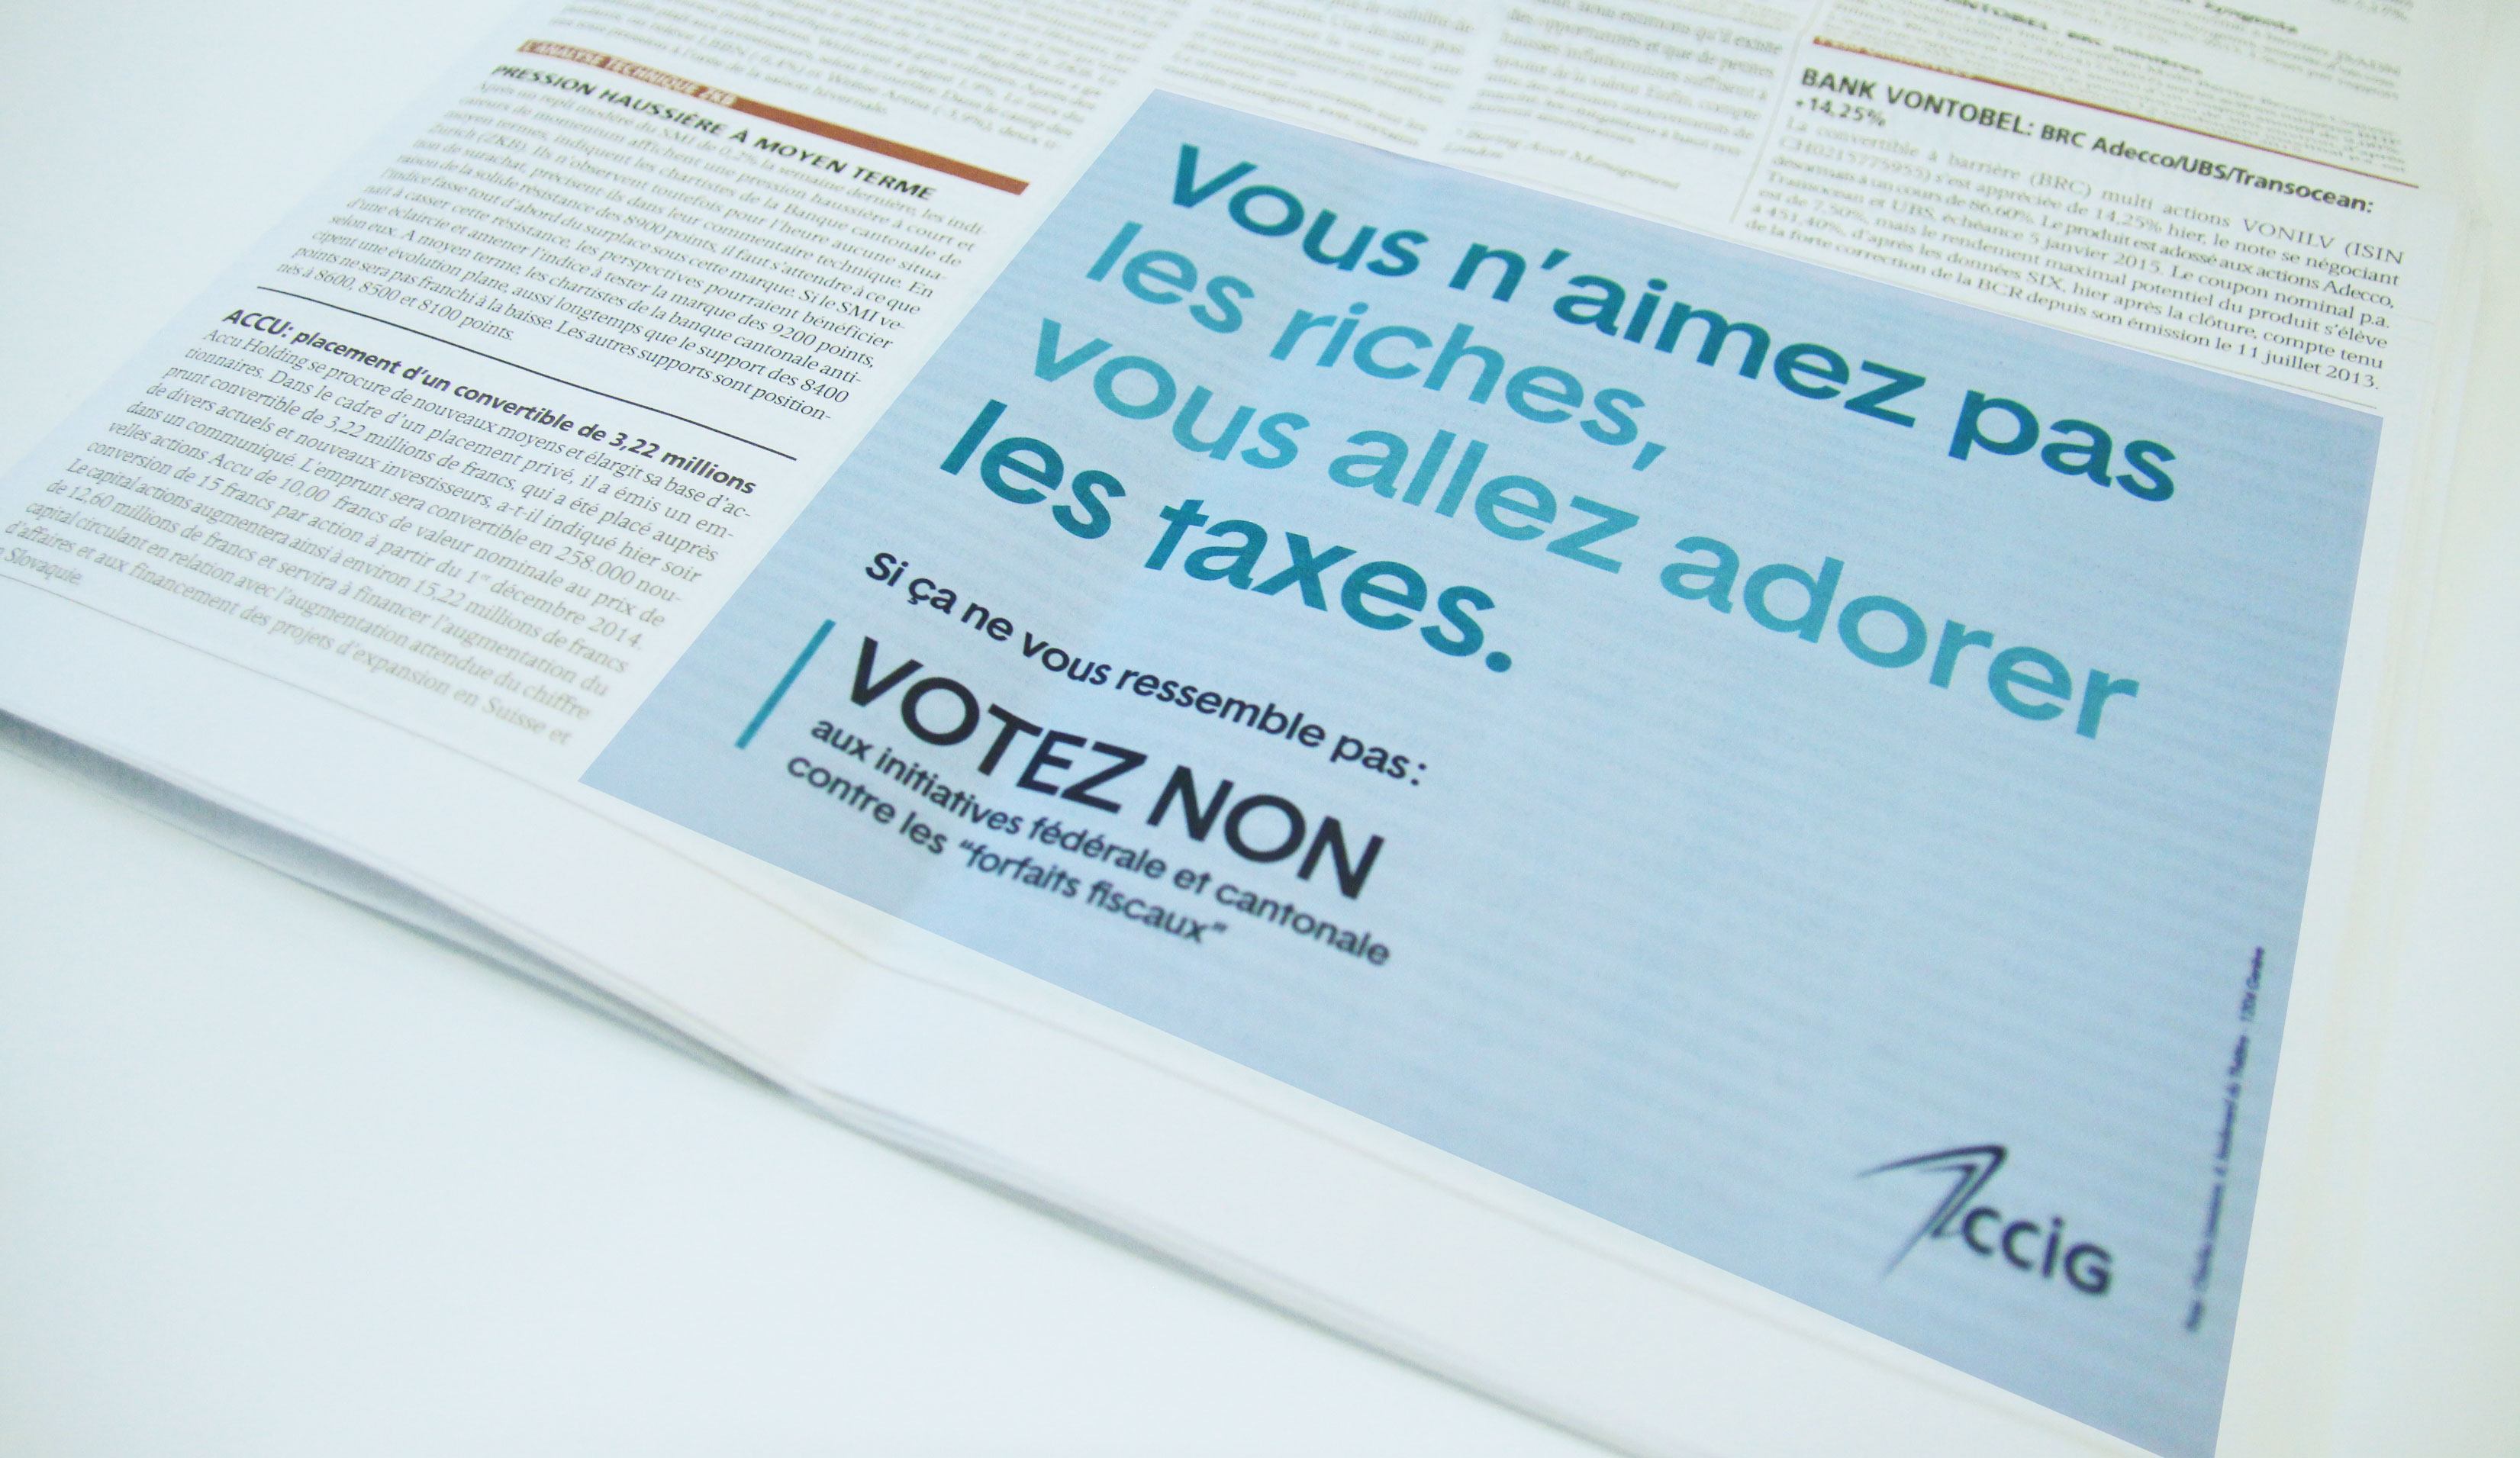 Political campaign advertising inserts in a newspaper